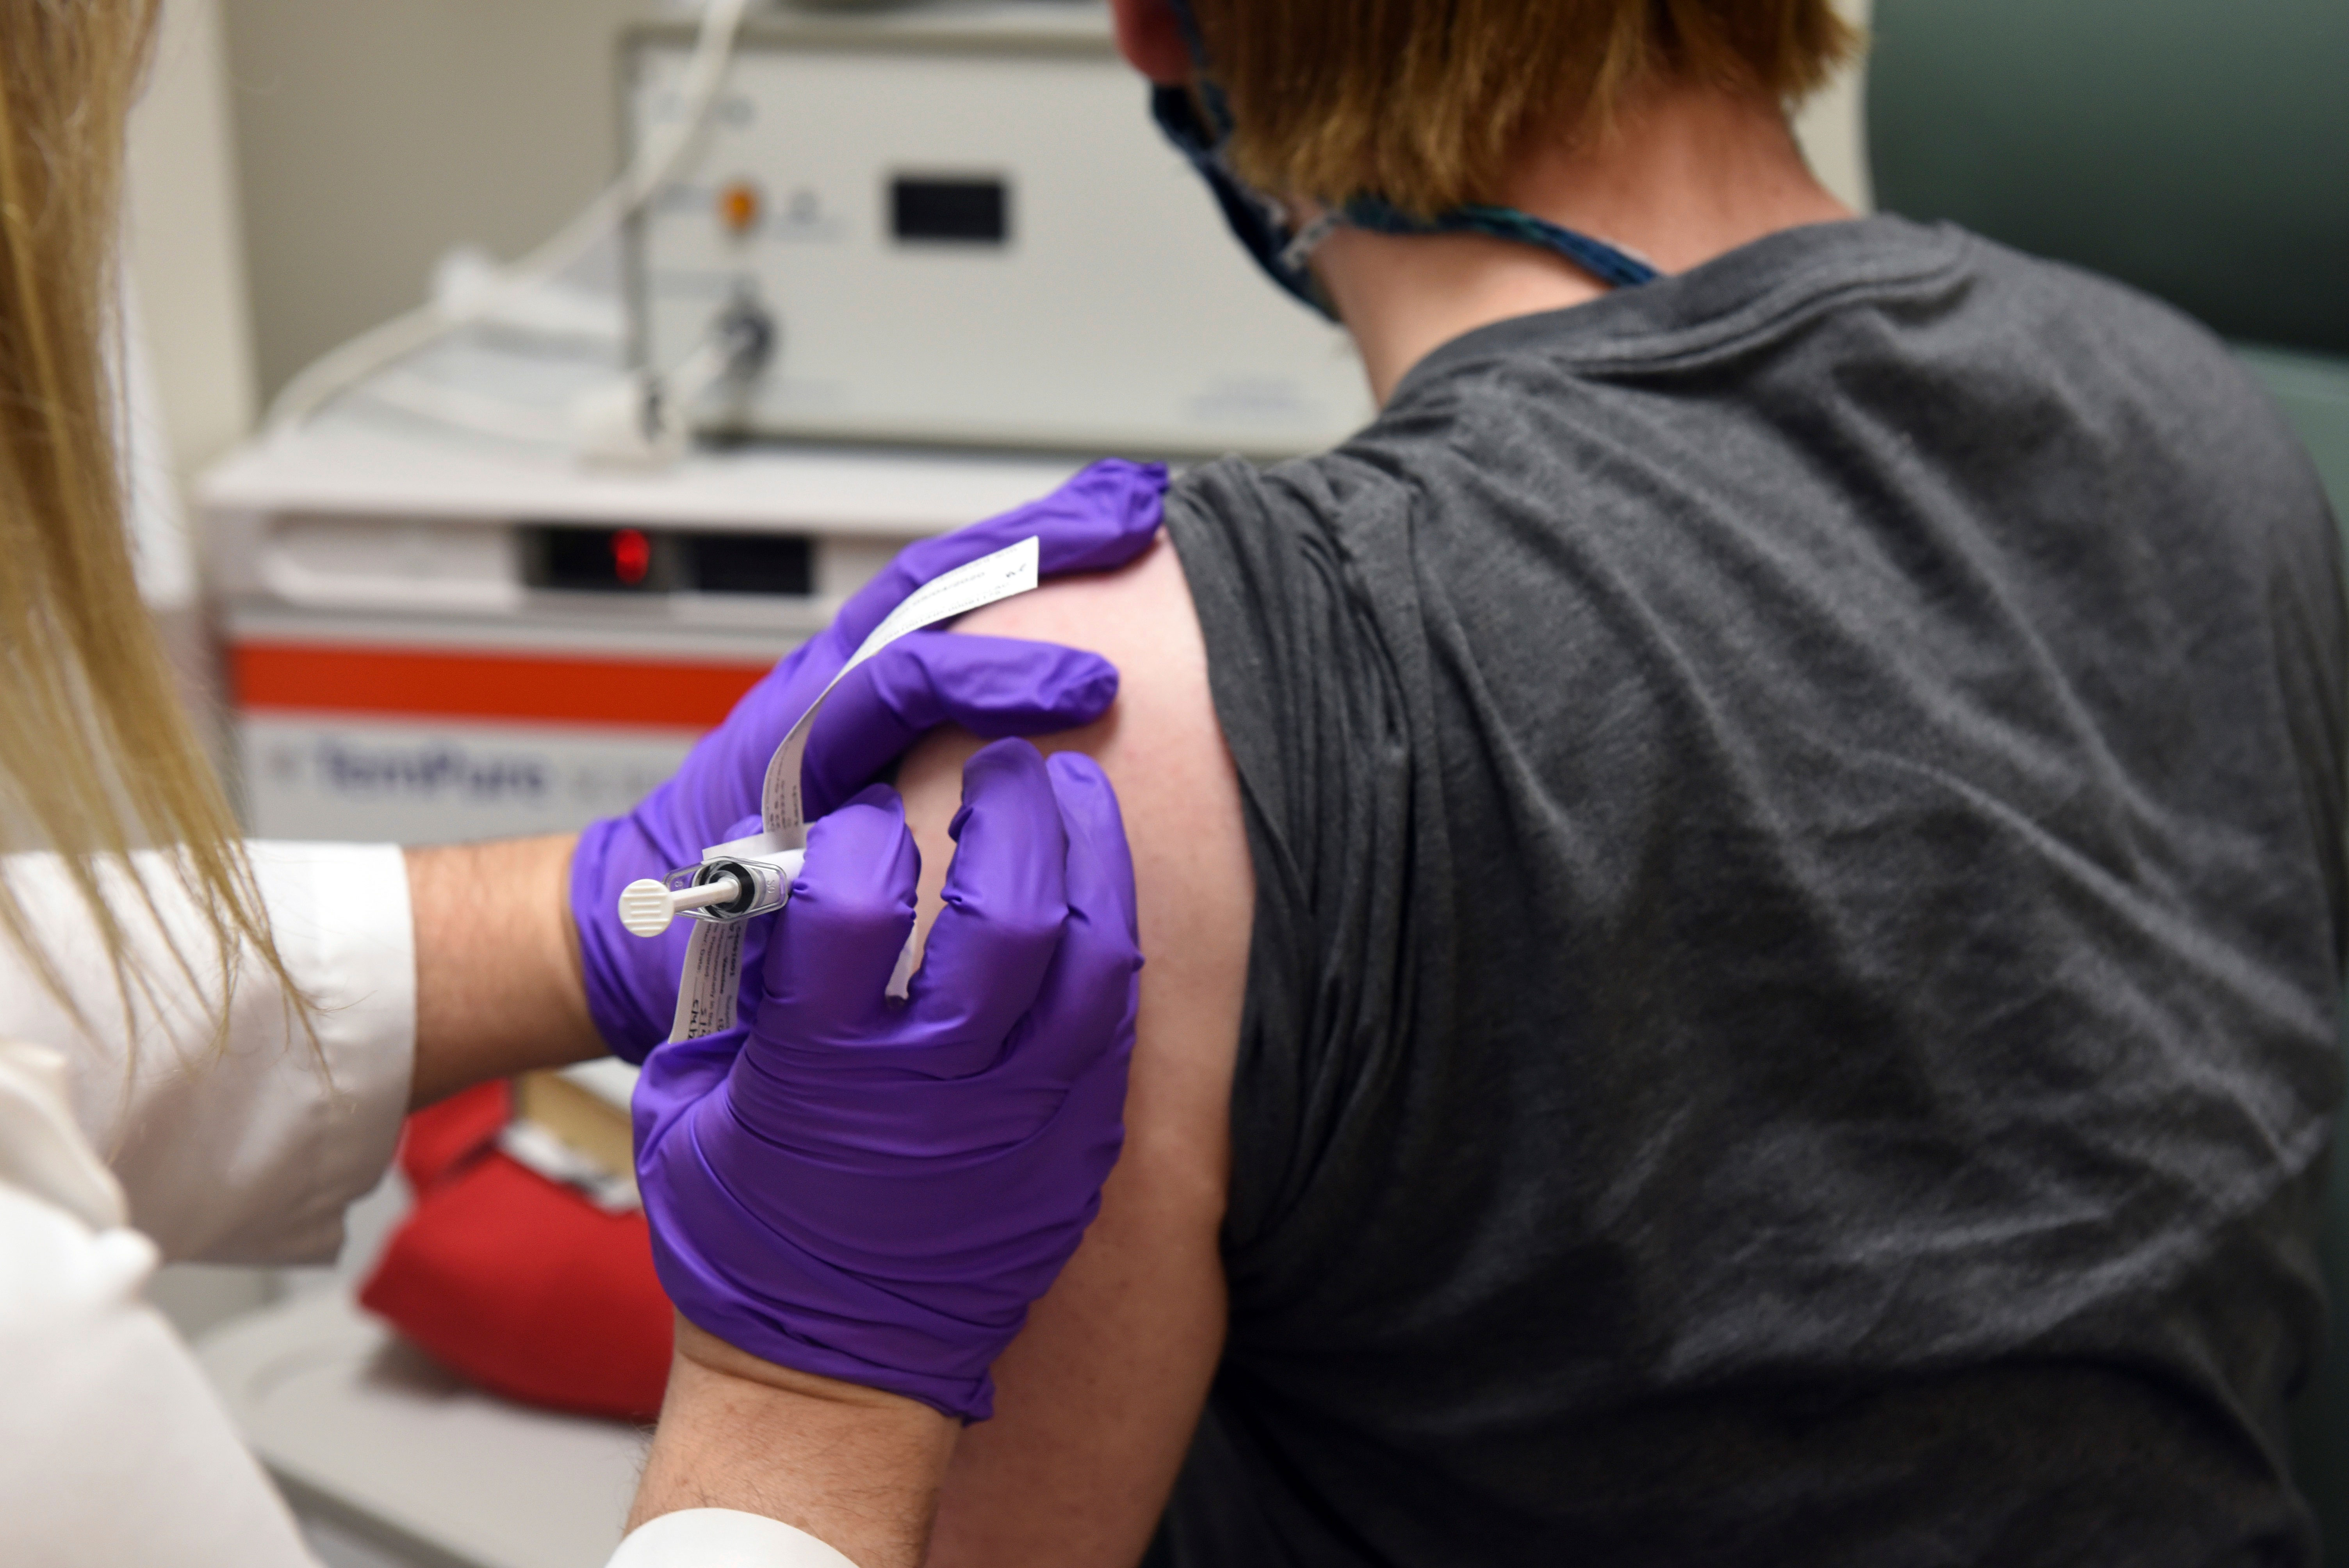 The first patient enrolled in Pfizer's Covid-19 vaccine clinical trial is pictured at the University of Maryland School of Medicine in Baltimore on May 4.